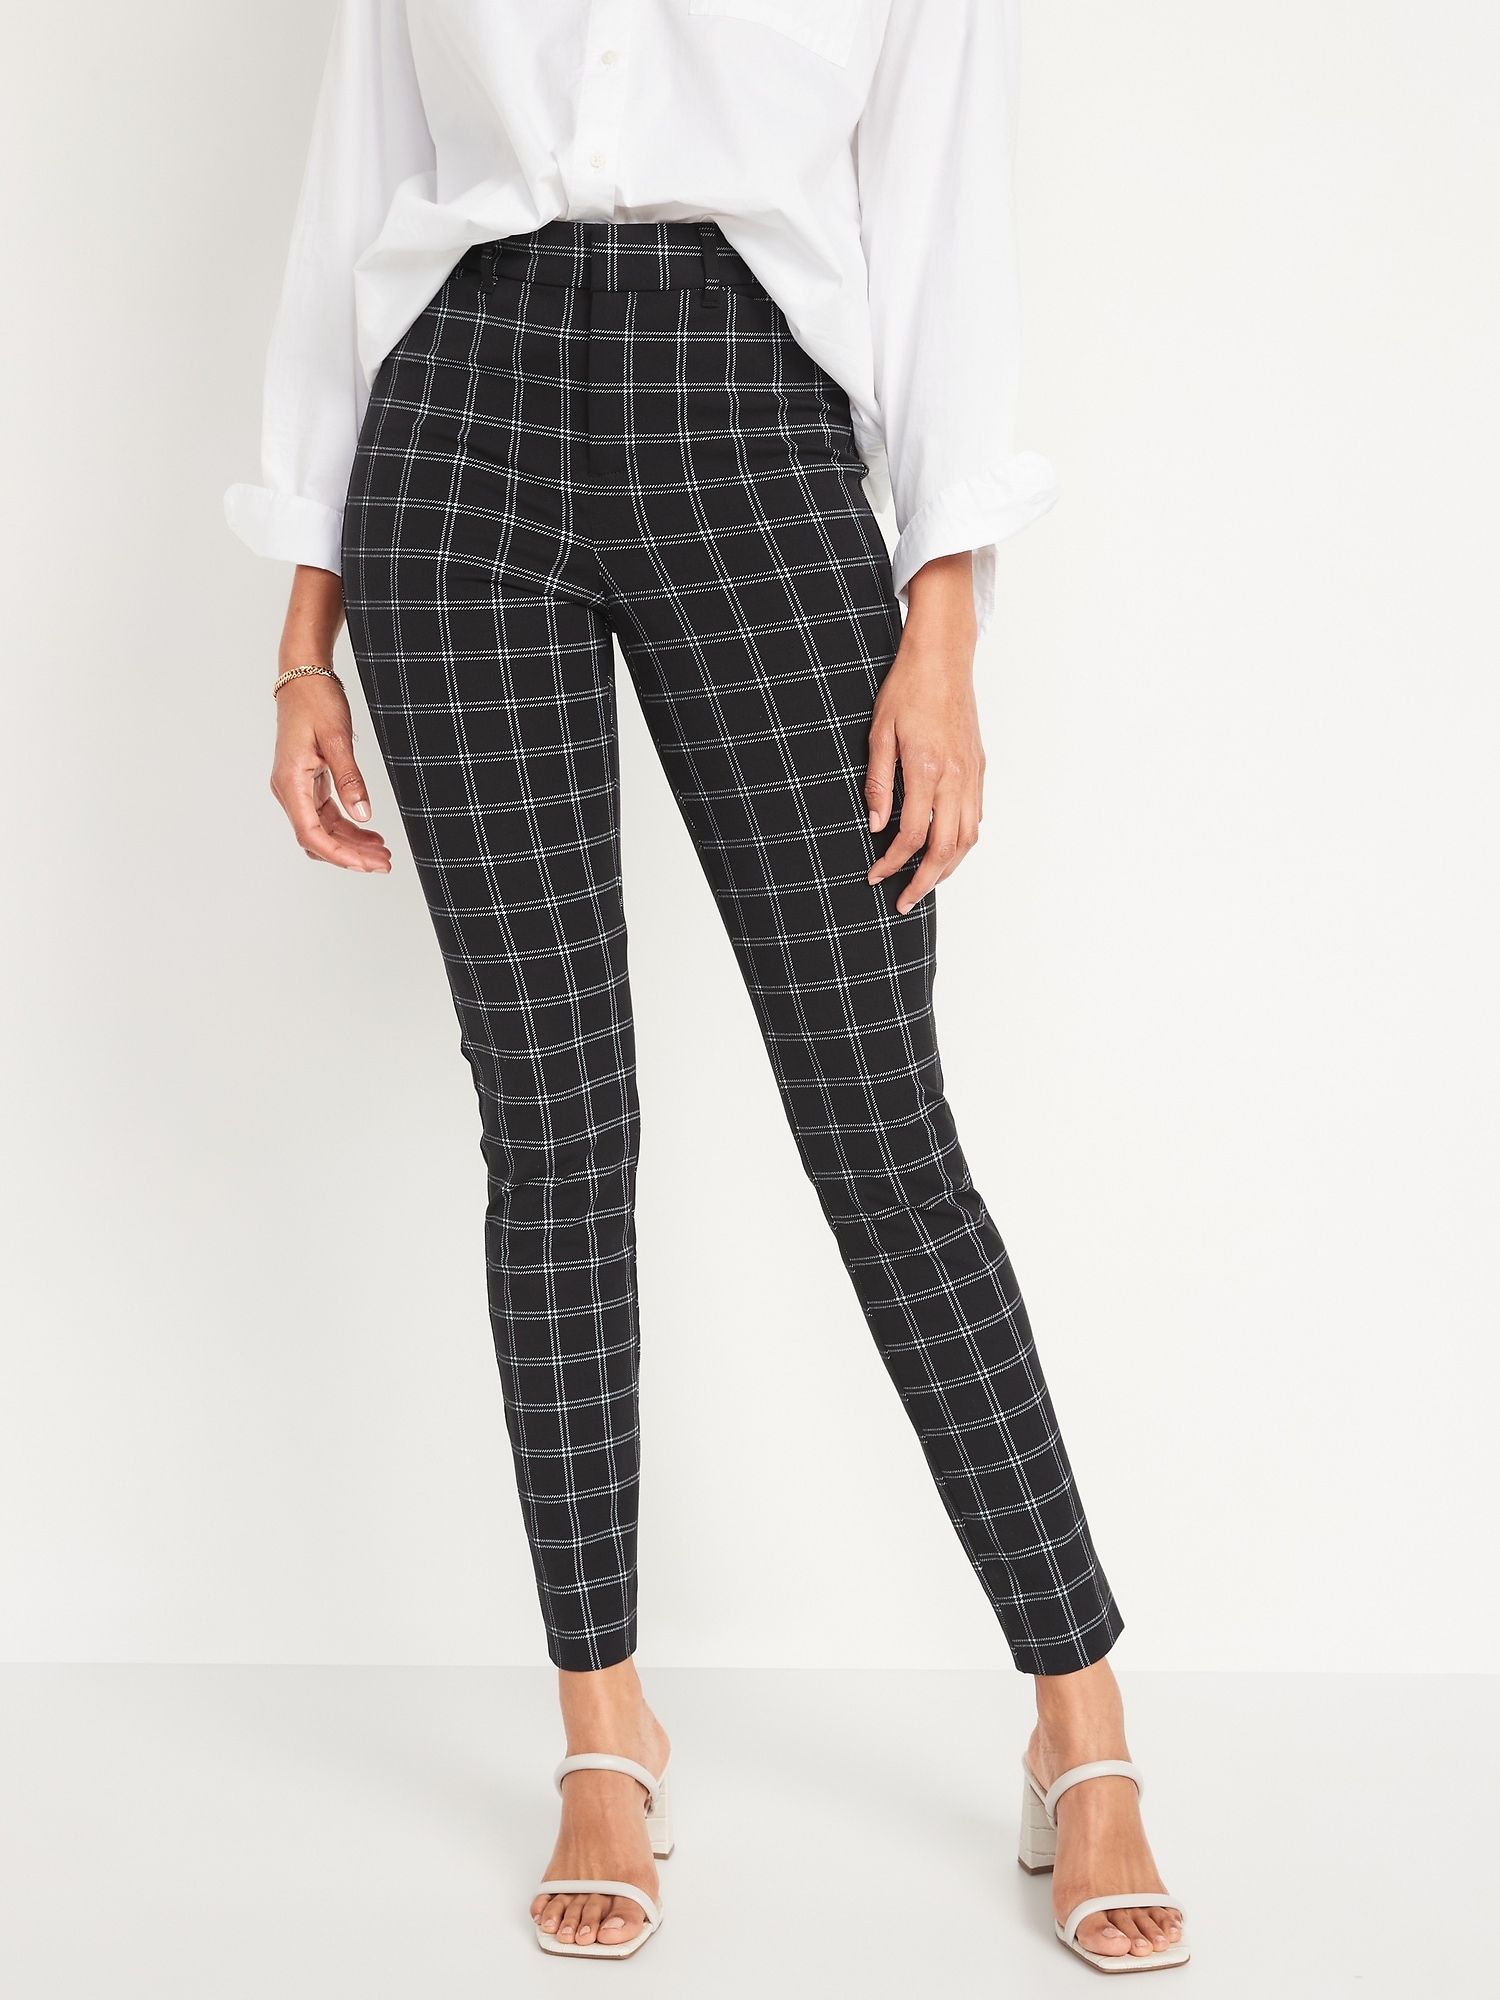 Willow & Root Plaid Trouser Pant - Women's Pants in Taupe Black | Buckle